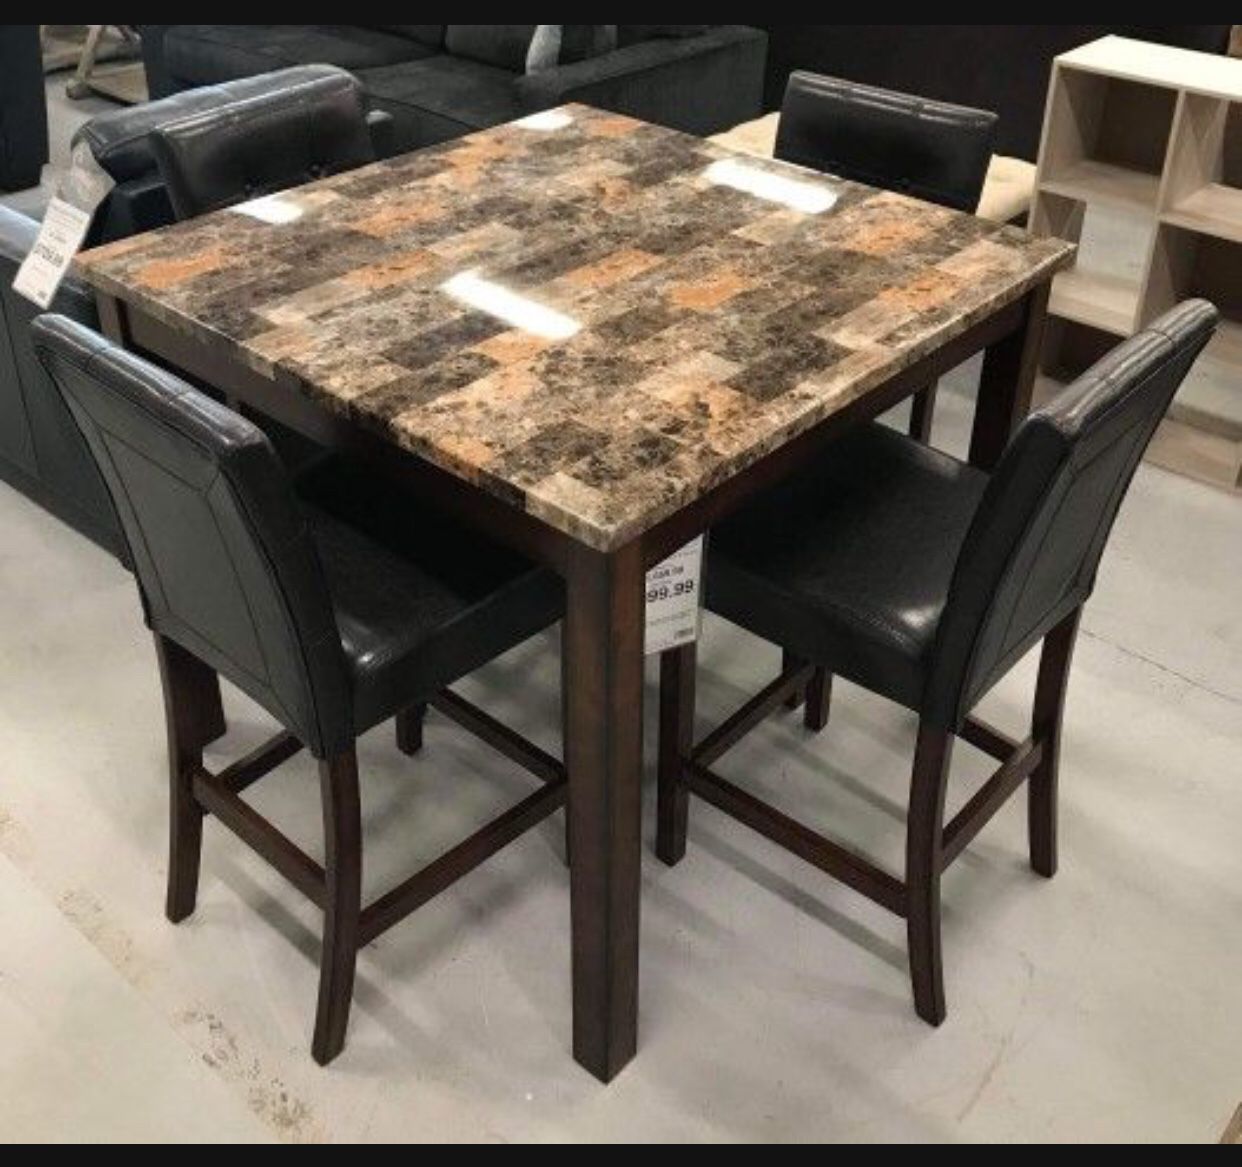 Marble Table & Black Bar Stools | Dining Set | Kitchen Table and Chairs👍 Showroom Available ✅